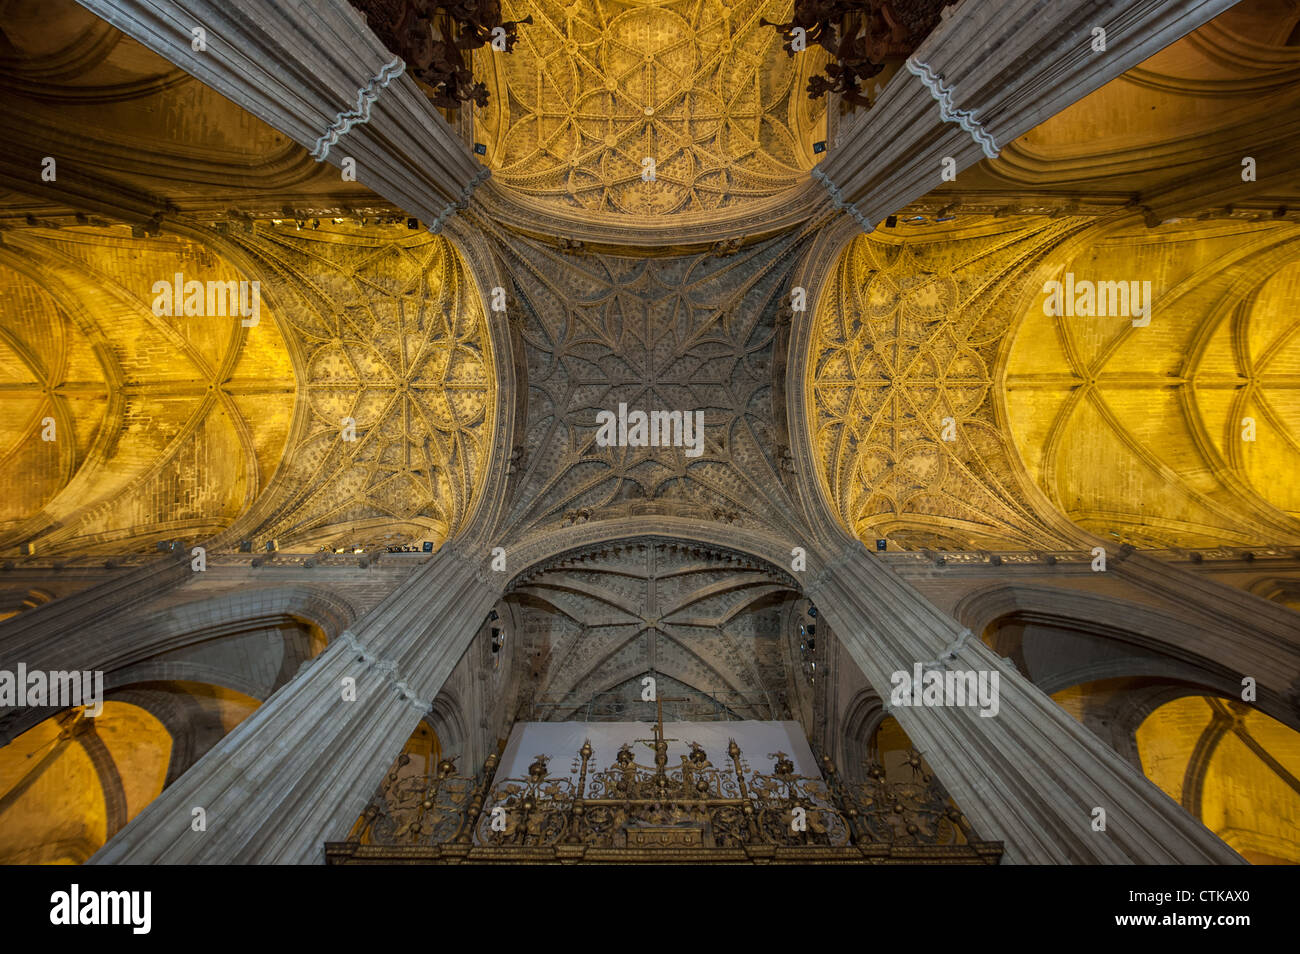 Interior of Seville Cathedral, Spain Stock Photo